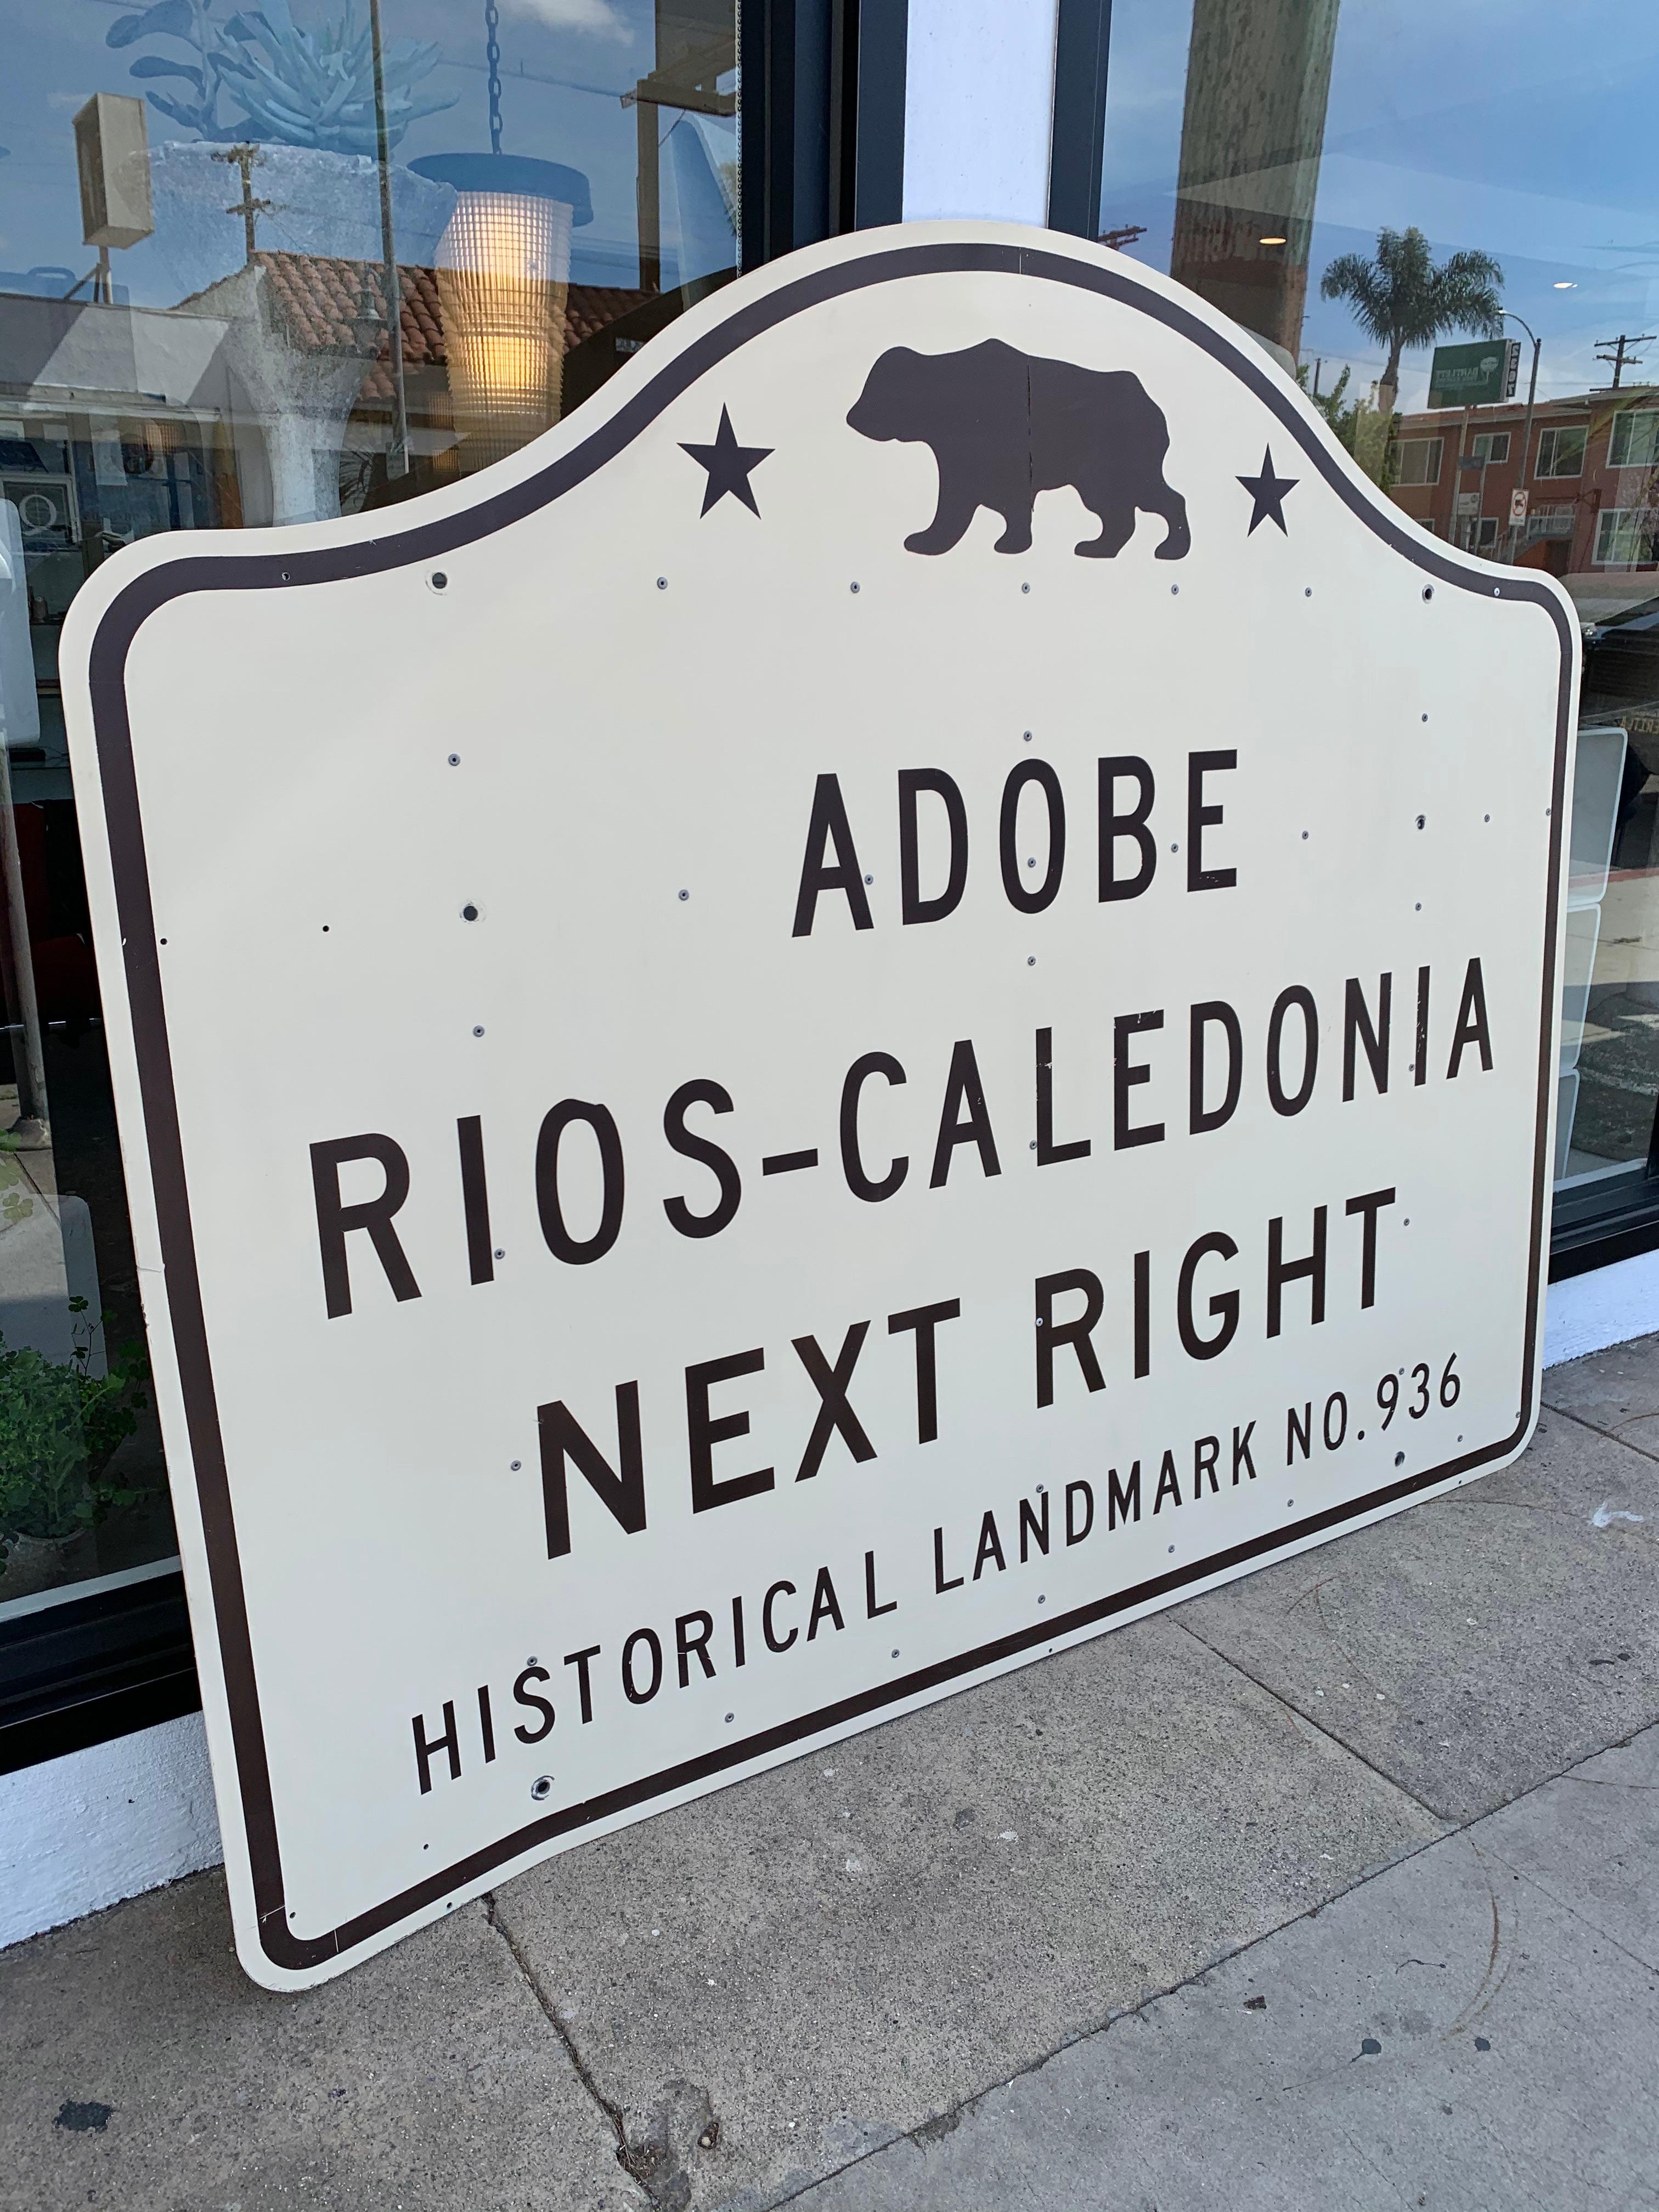 Interesting vintage California highway sign for Adobe Rios-Caledonia. This is a California historical landmark and on the National Register of Historic Places. It is an adobe dwelling built in 1835 located in San Miguel, California, in San Luis